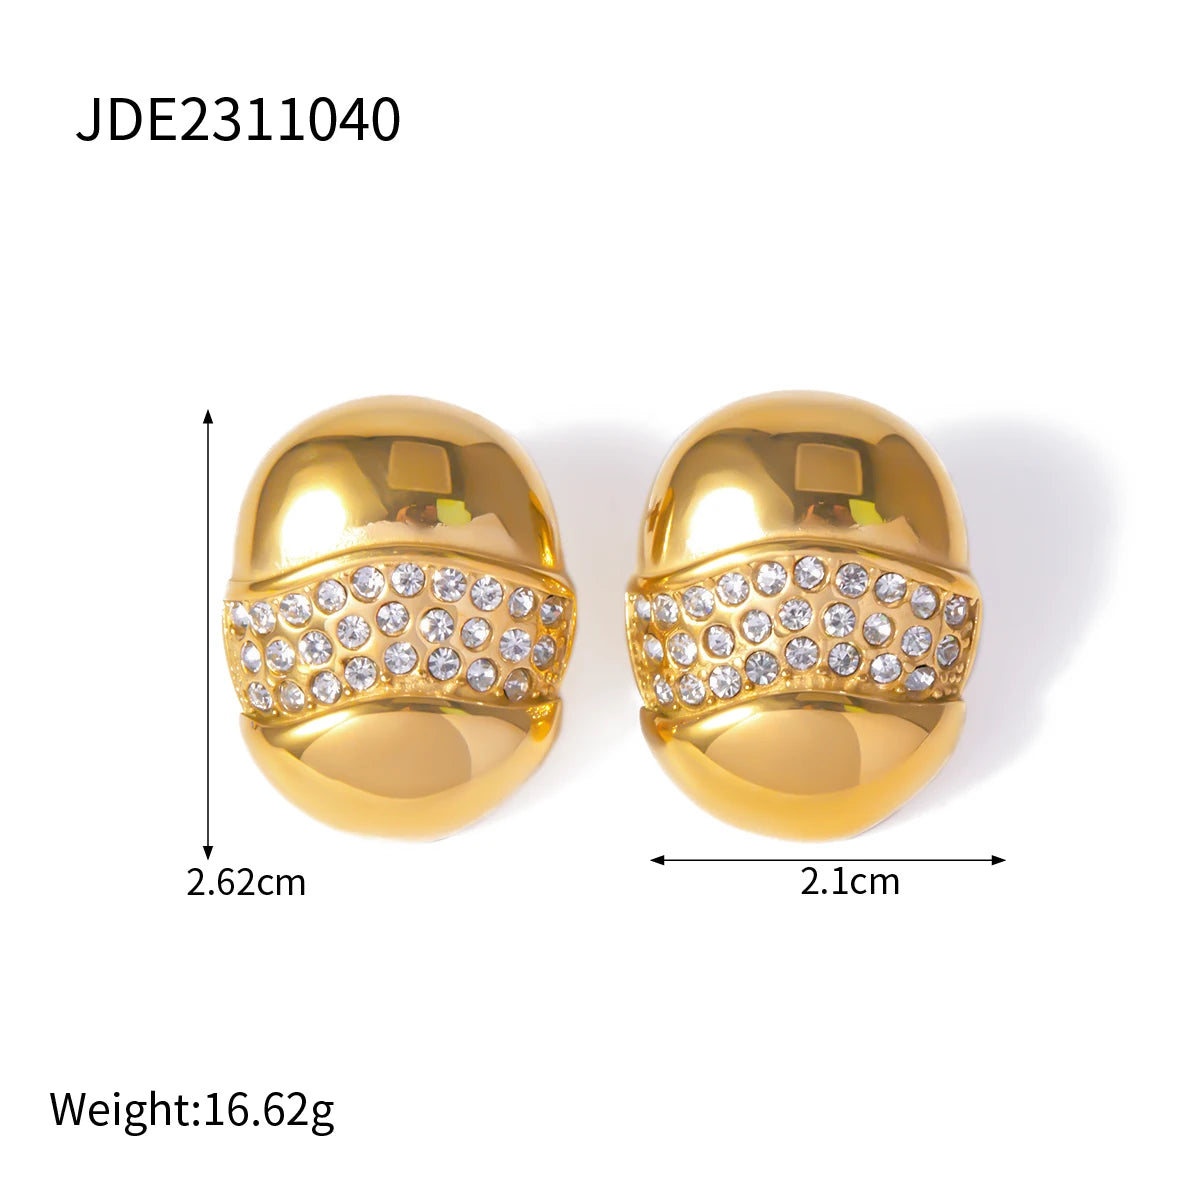 Oval gold earrings with stones-EA375